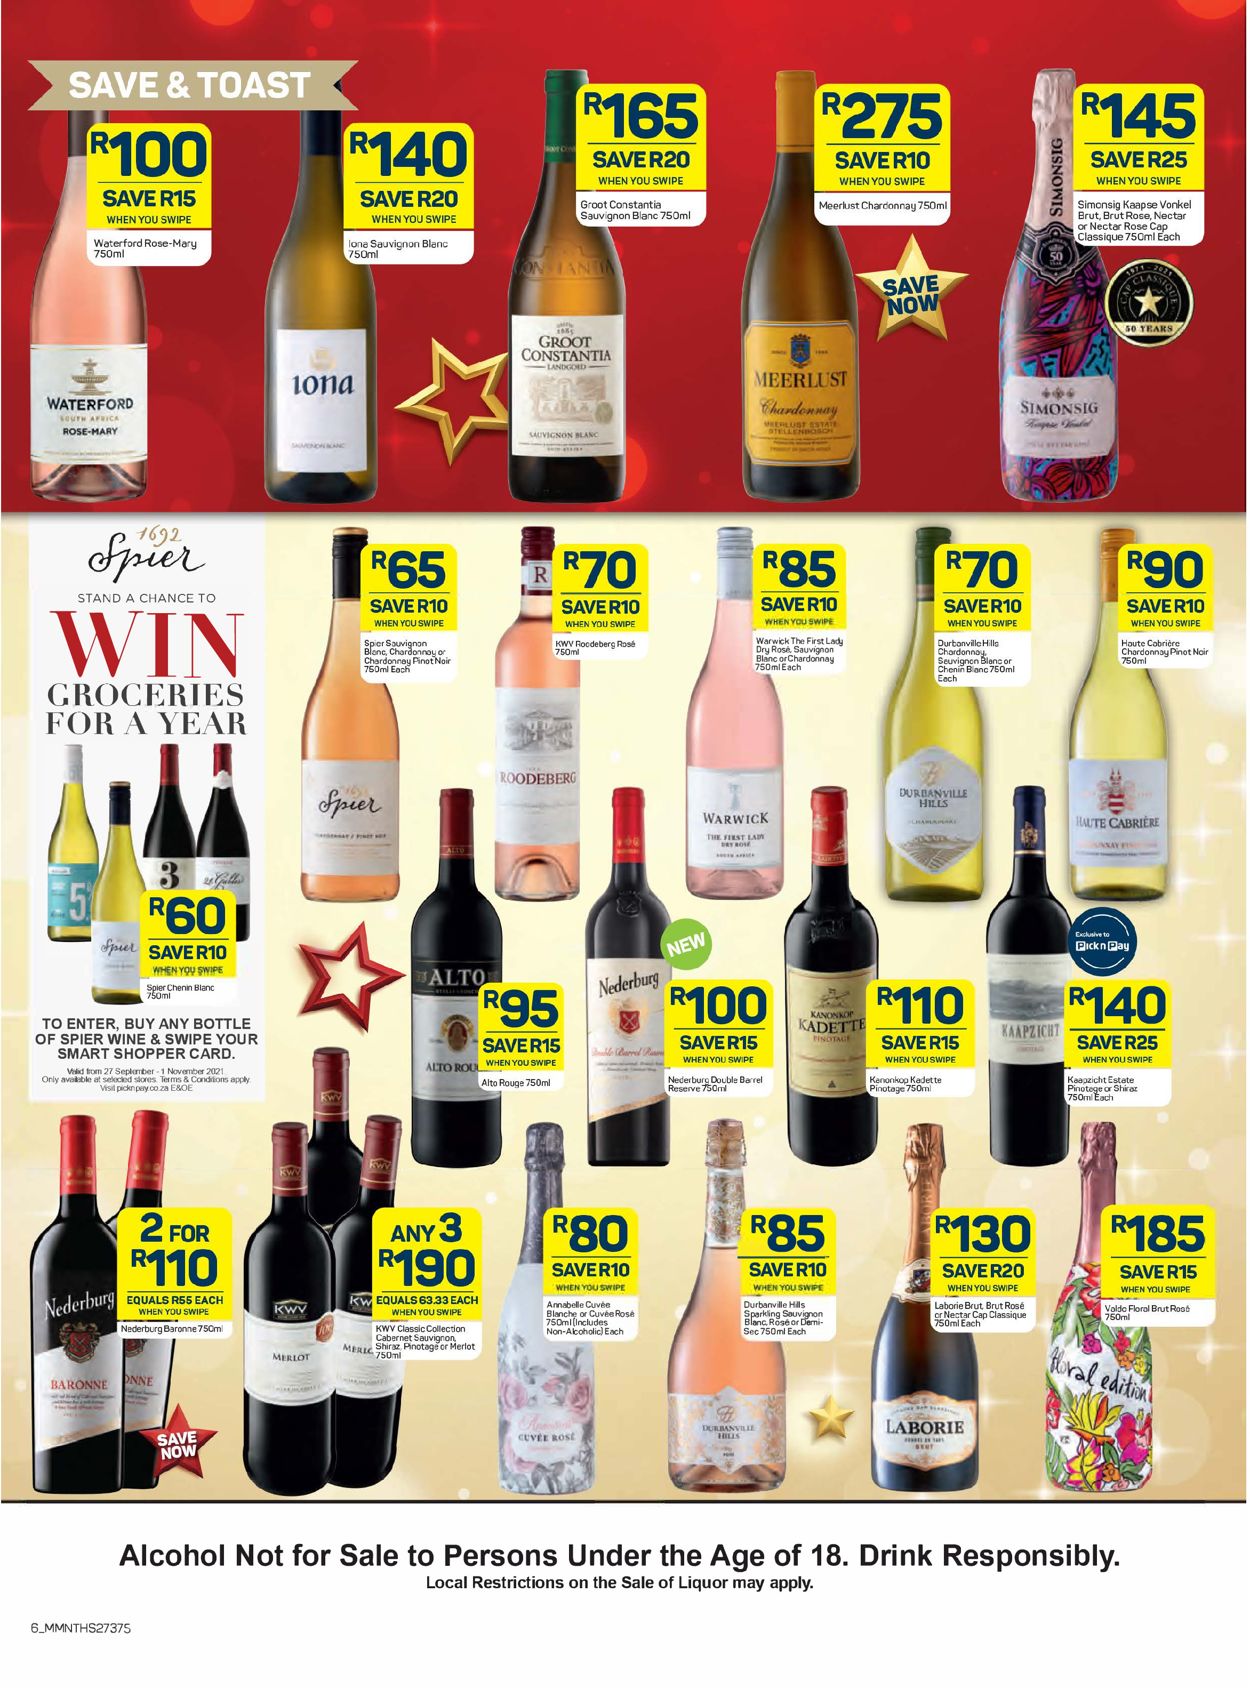 Pick n Pay Catalogue - 2021/10/25-2021/11/07 (Page 6)